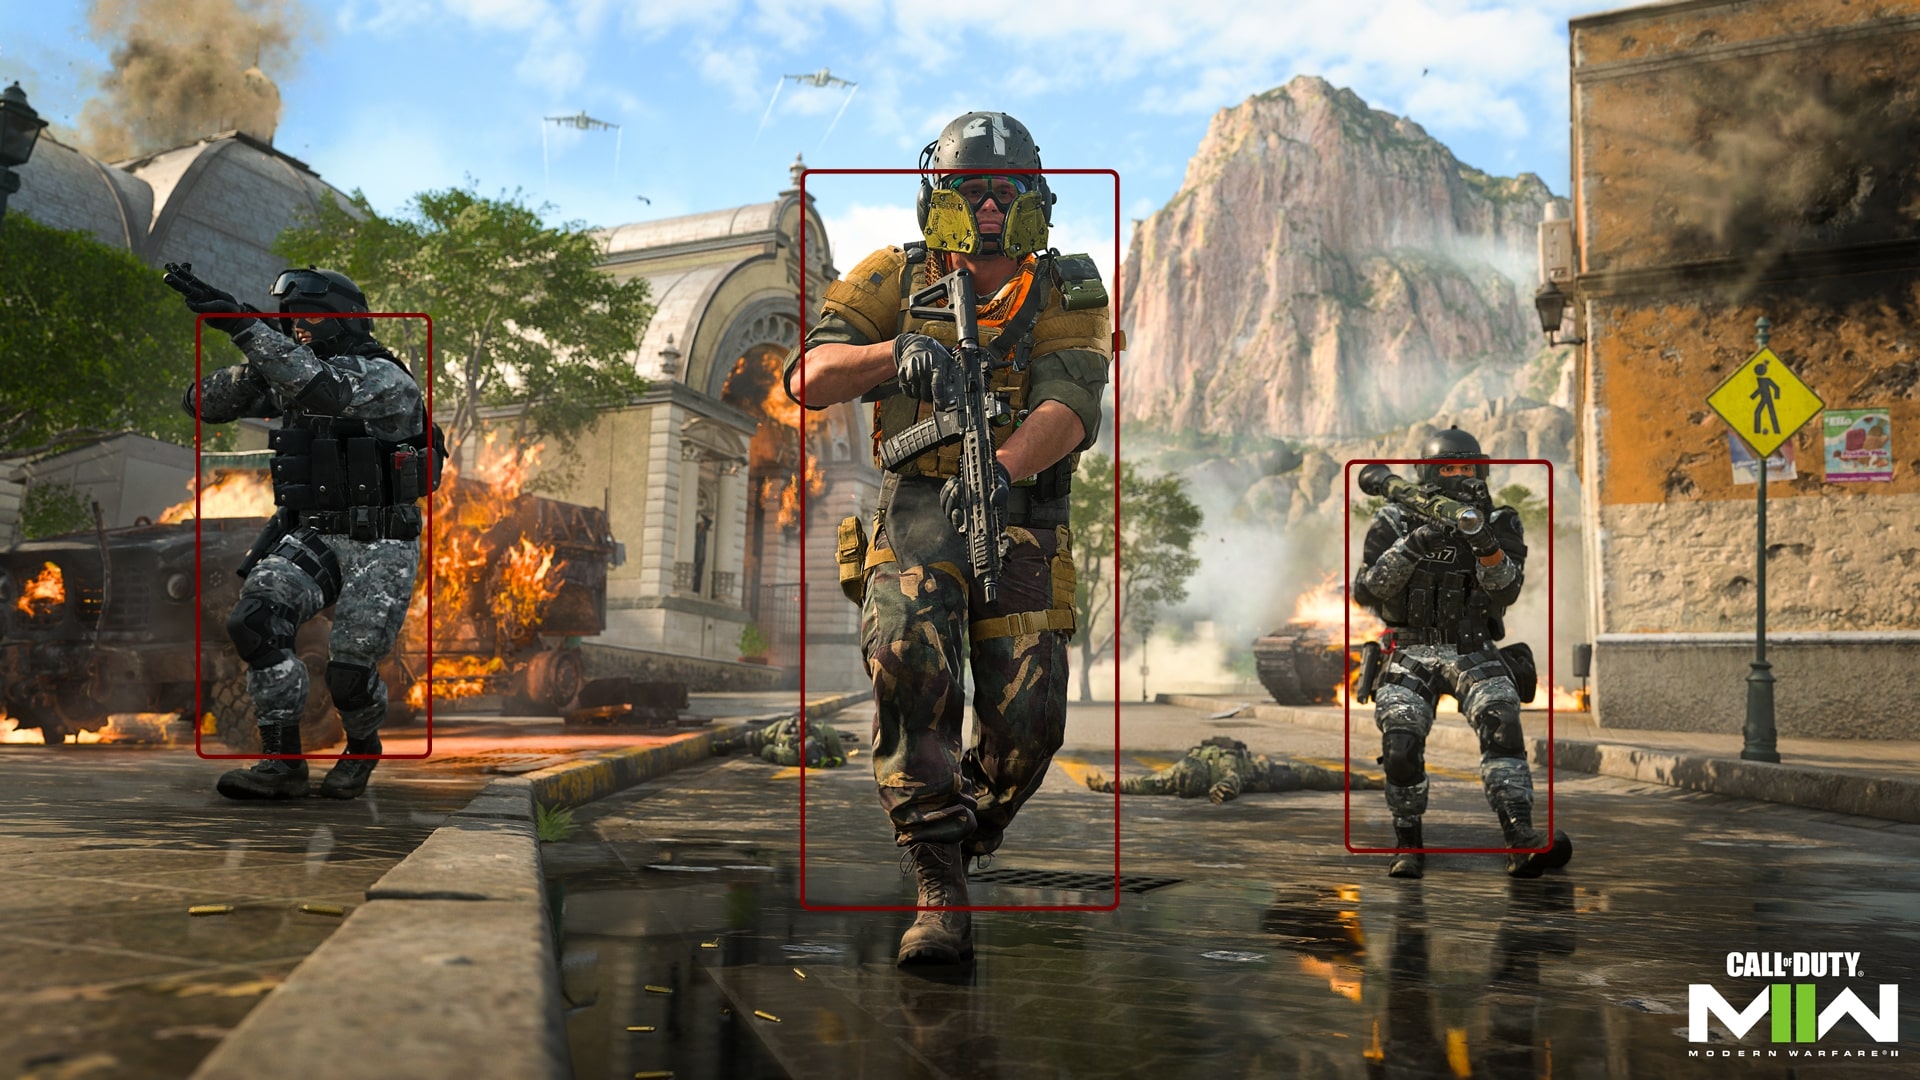 Call Of Duty: Explained: Activision's hallucination, other anti-cheating  tools and how they are stopping hackers in Call of Duty - Times of India